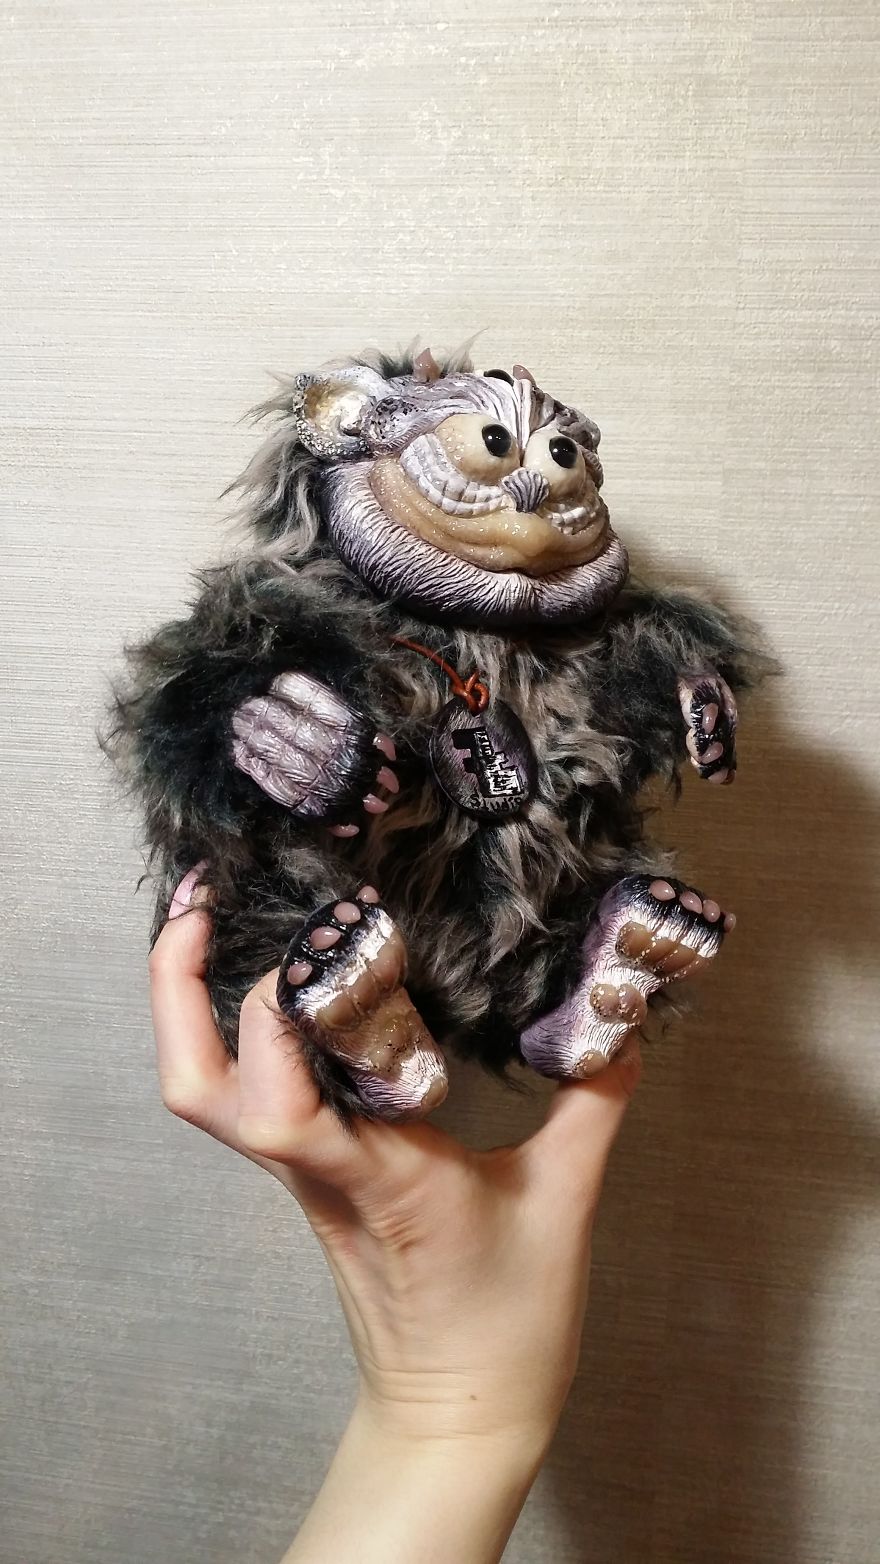 Author's Handmade Toys Of Polymer Clay And Artificial Fur